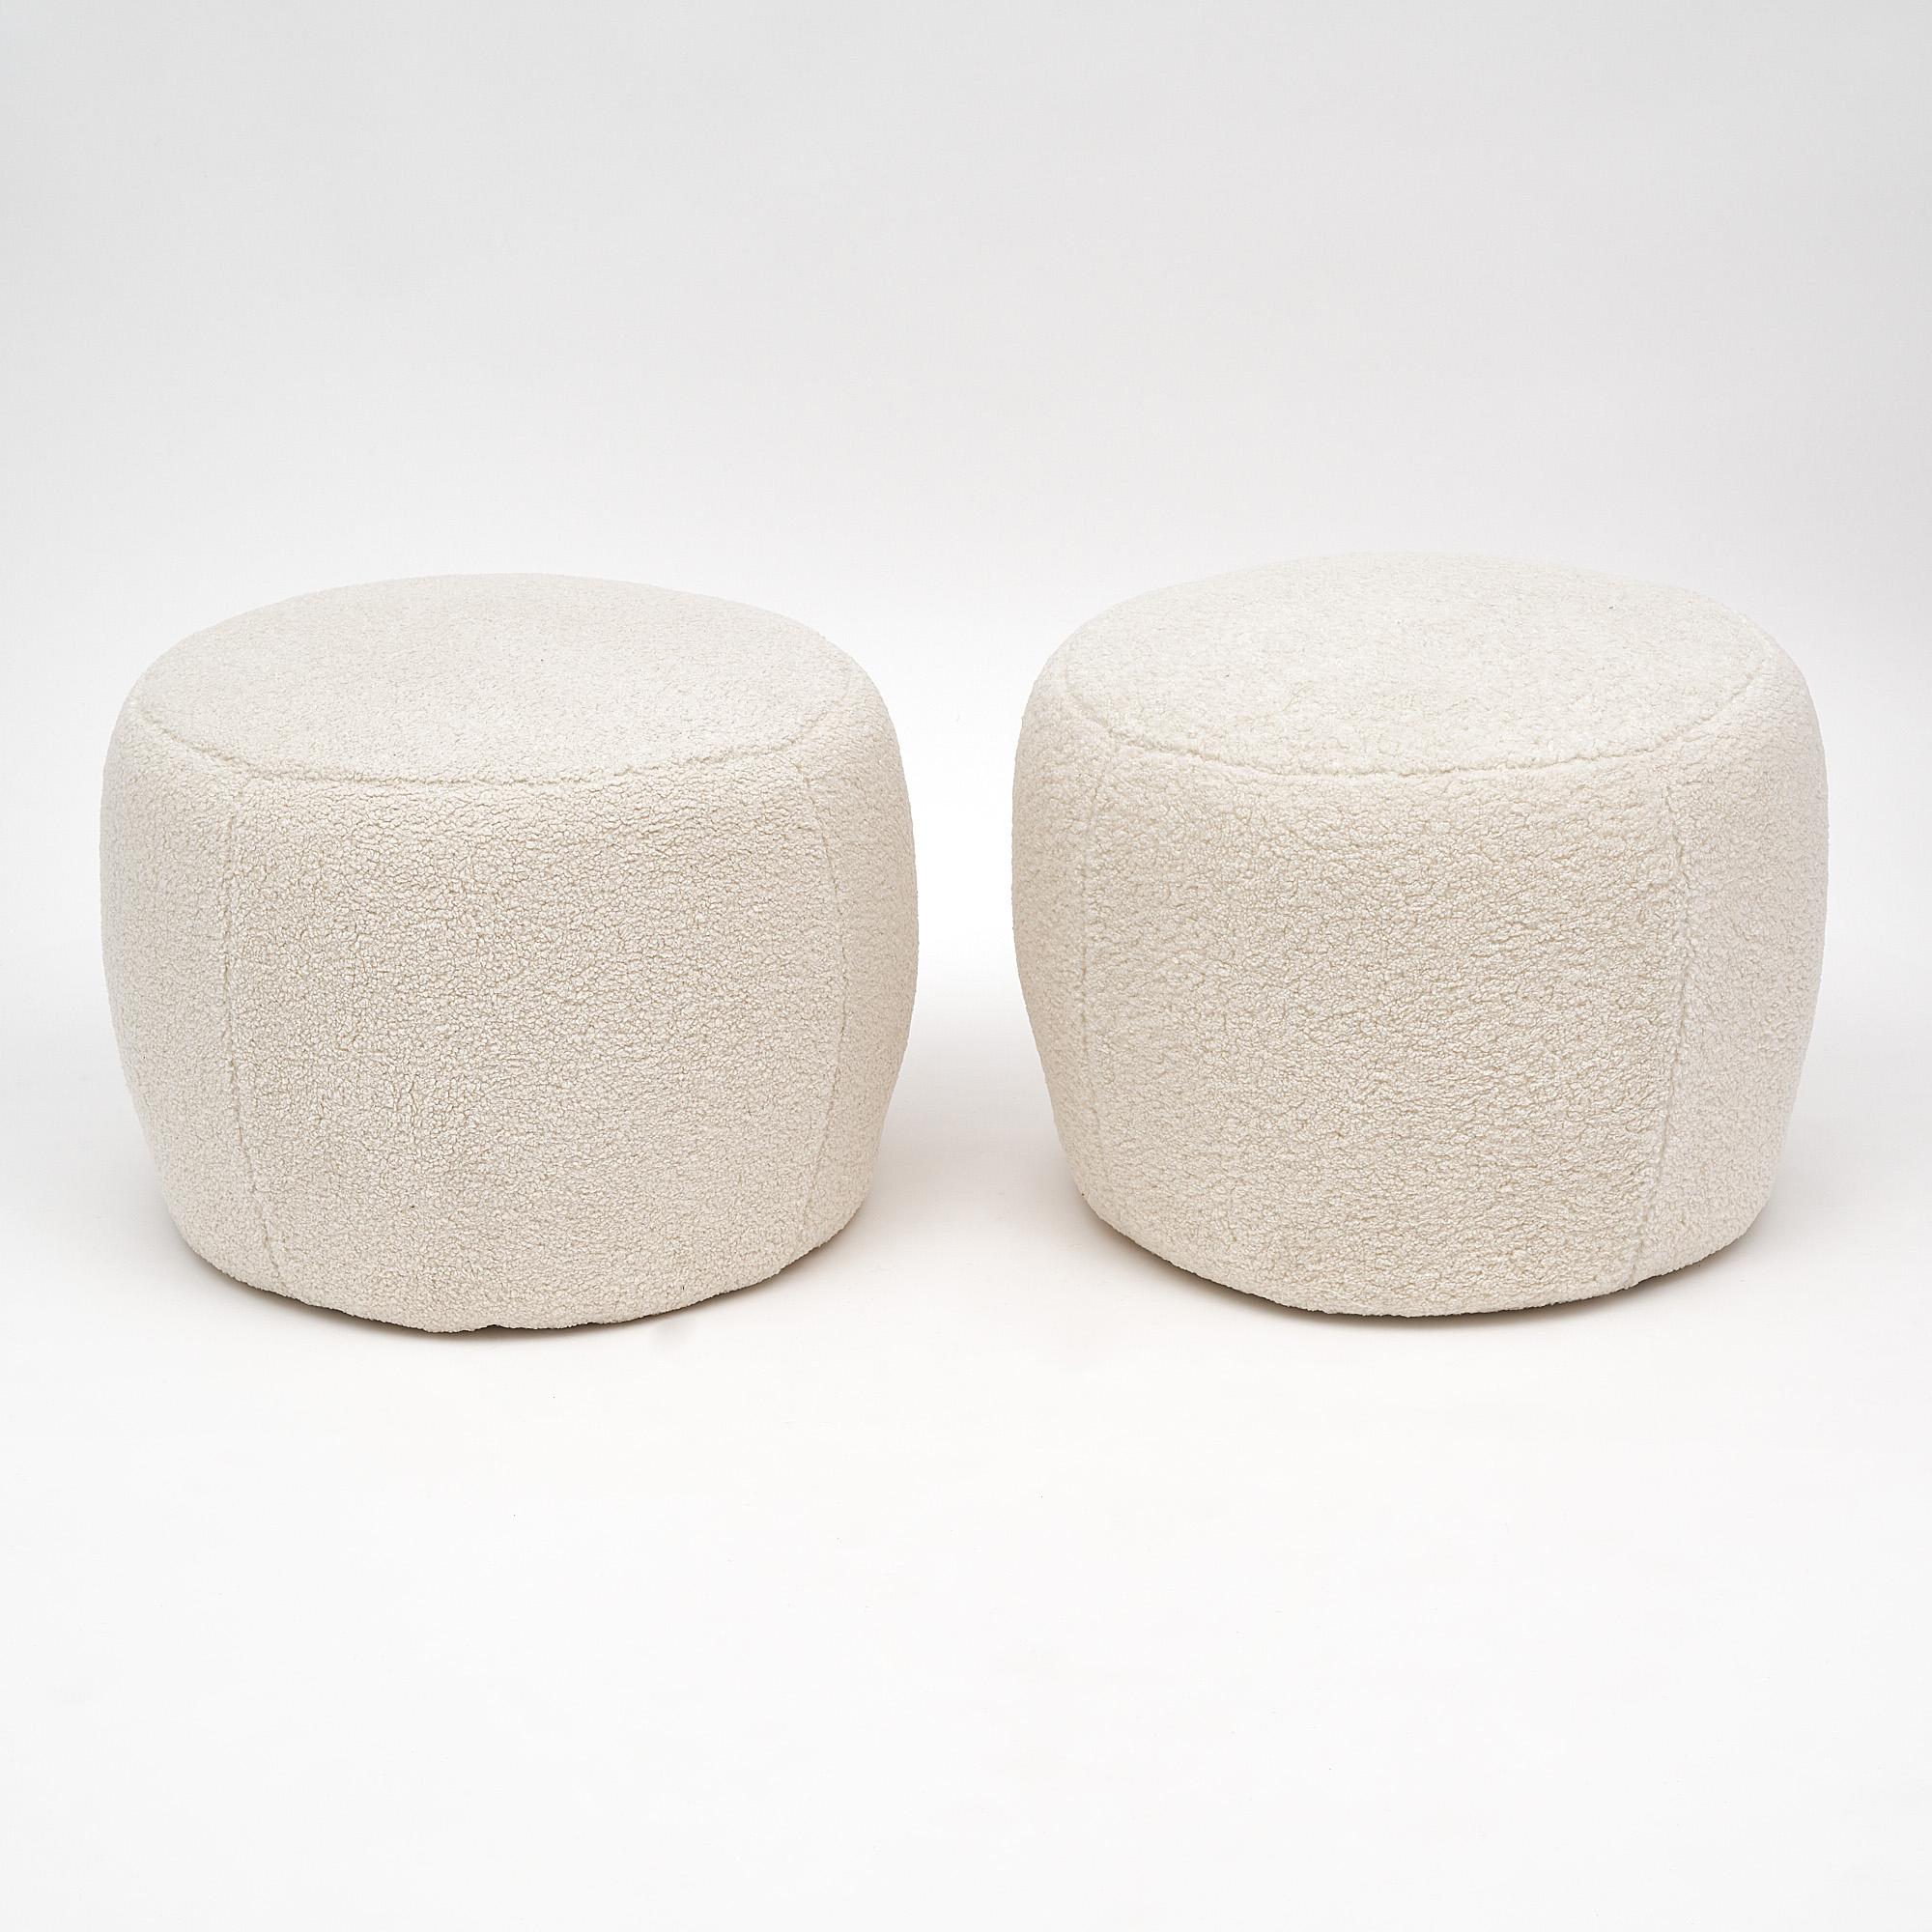 Pair of stools, Italian, in the modernist style. This pair has been newly handcrafted in a “bouclé” wool blend. We love the minimal, inviting design of this pair.